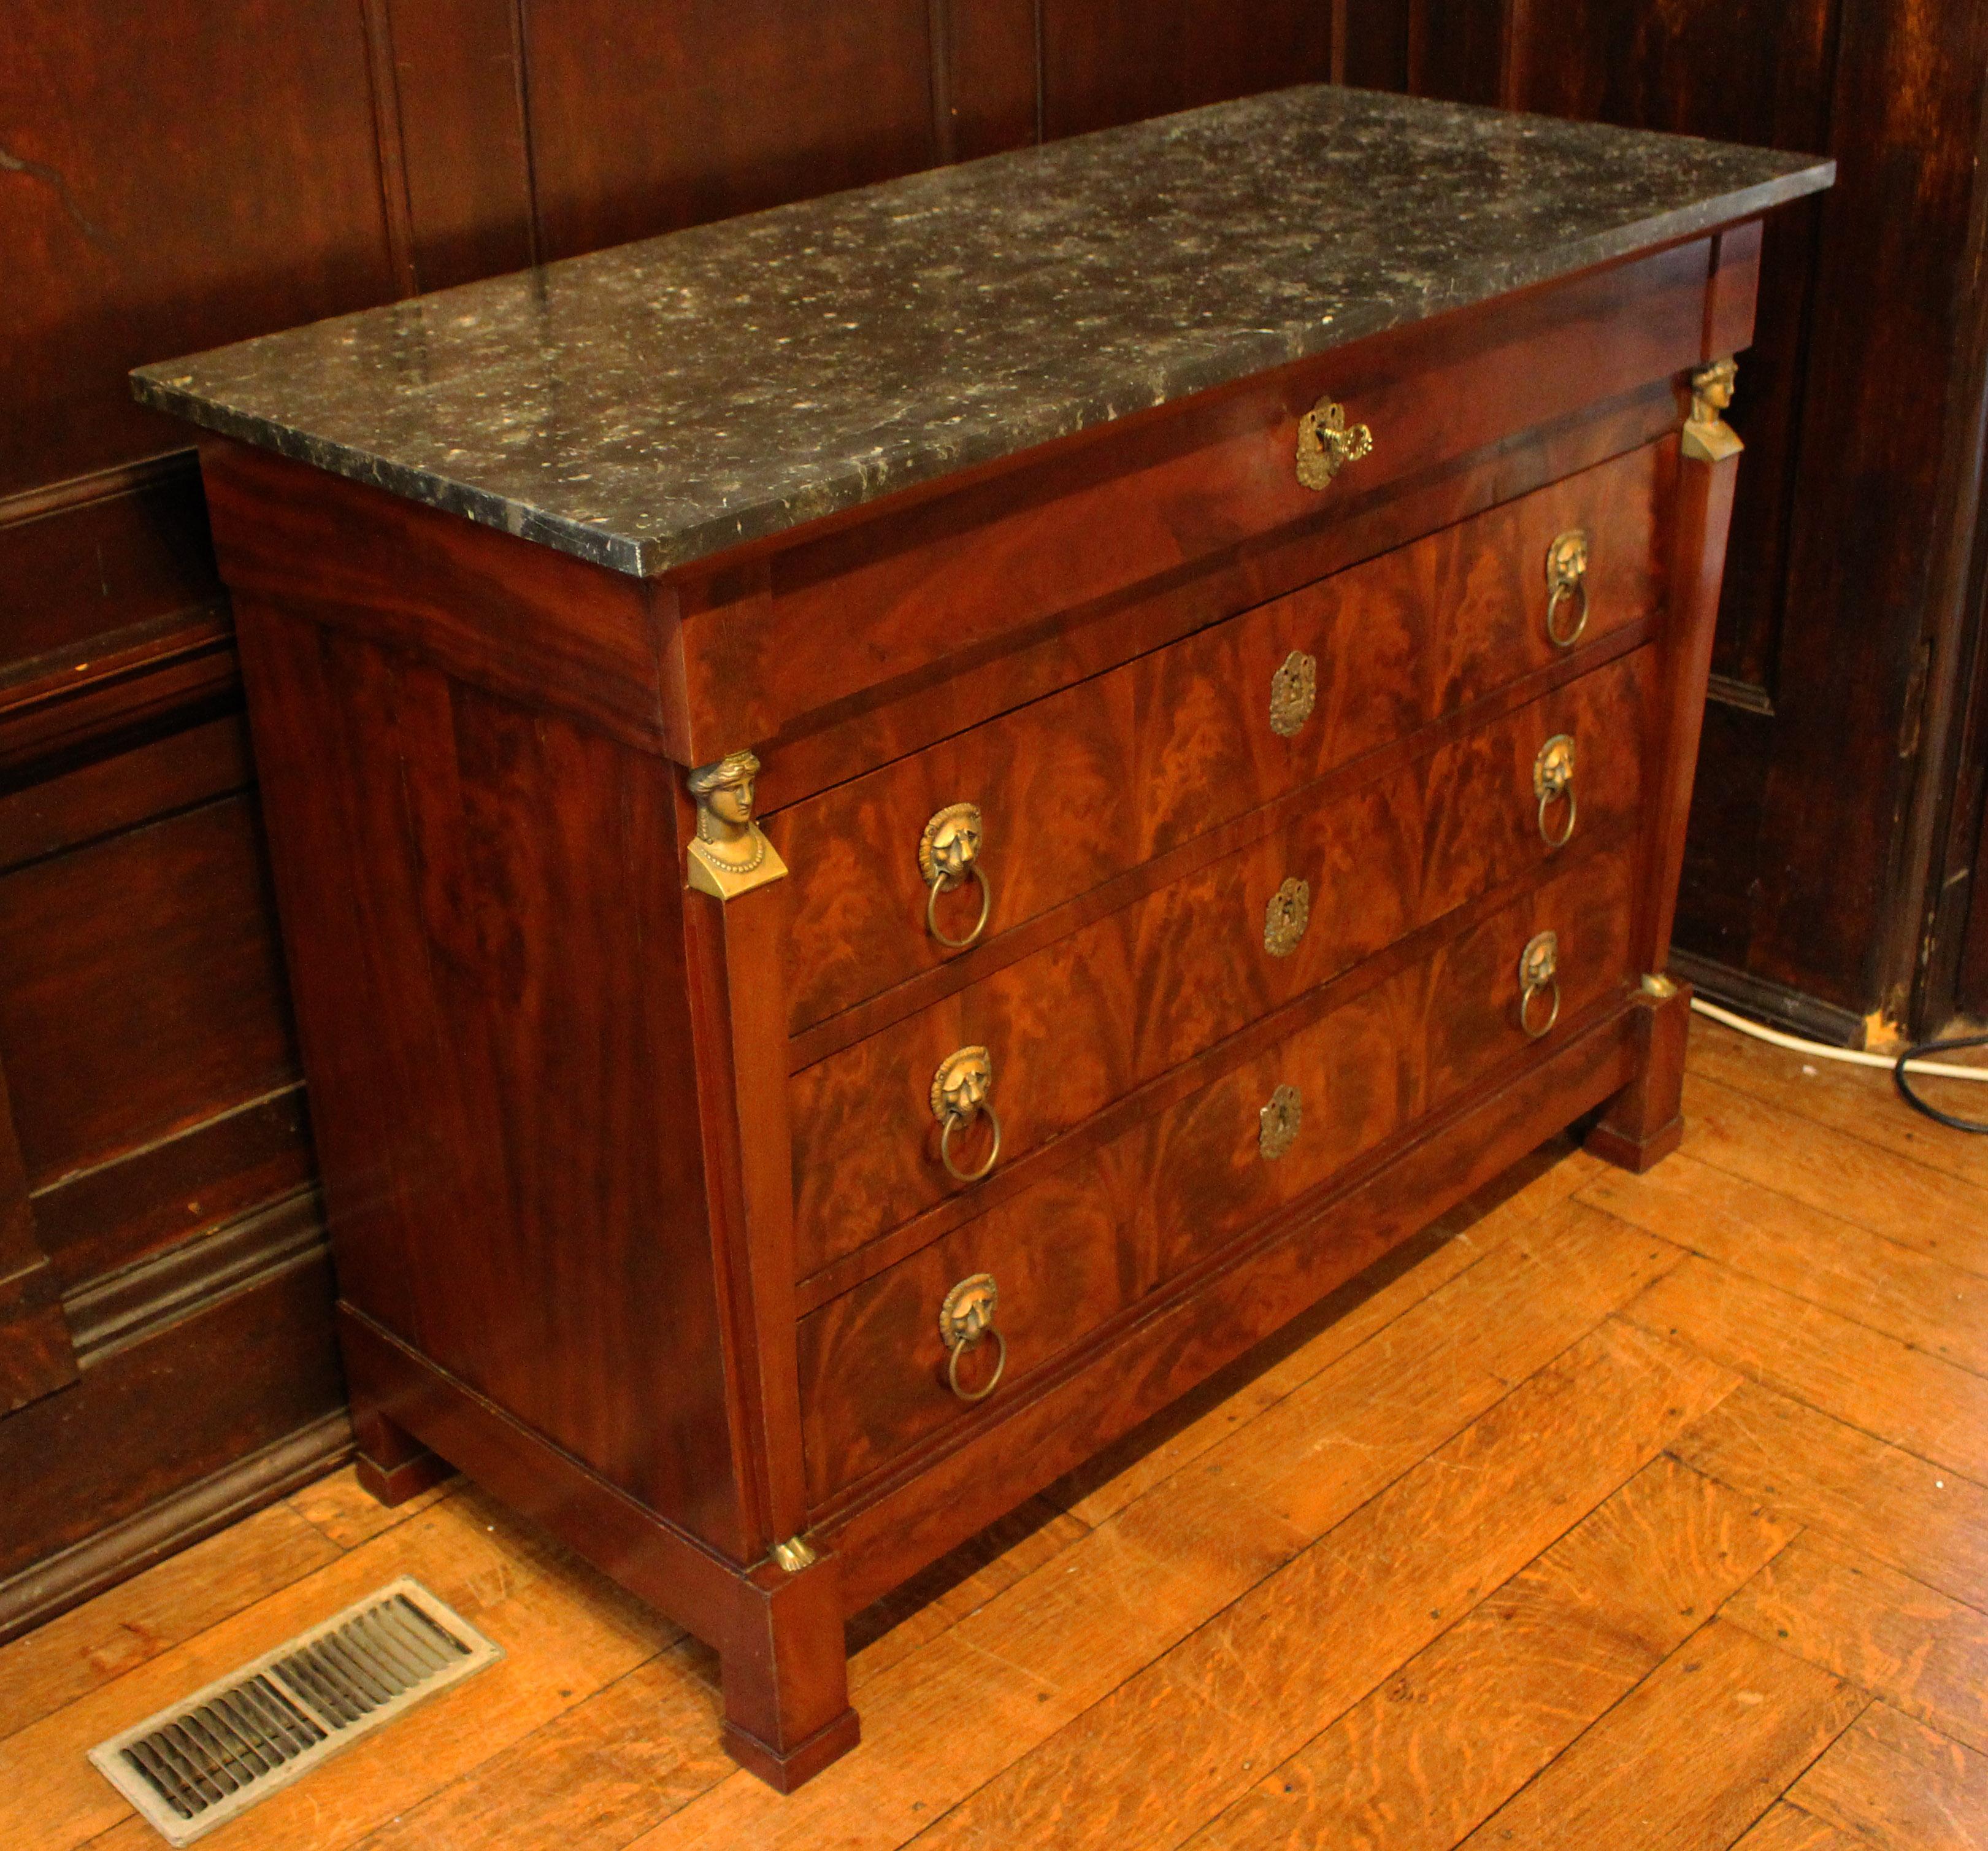 A French Empire marble top commode, circa 1820s-30s. Flame mahogany front flanked by pilasters featuring Grecian women with bronze busts & feet. Later ring turned lion mask pulls. Bronze escutcheons. Square straight feet ending in plinths. Oak